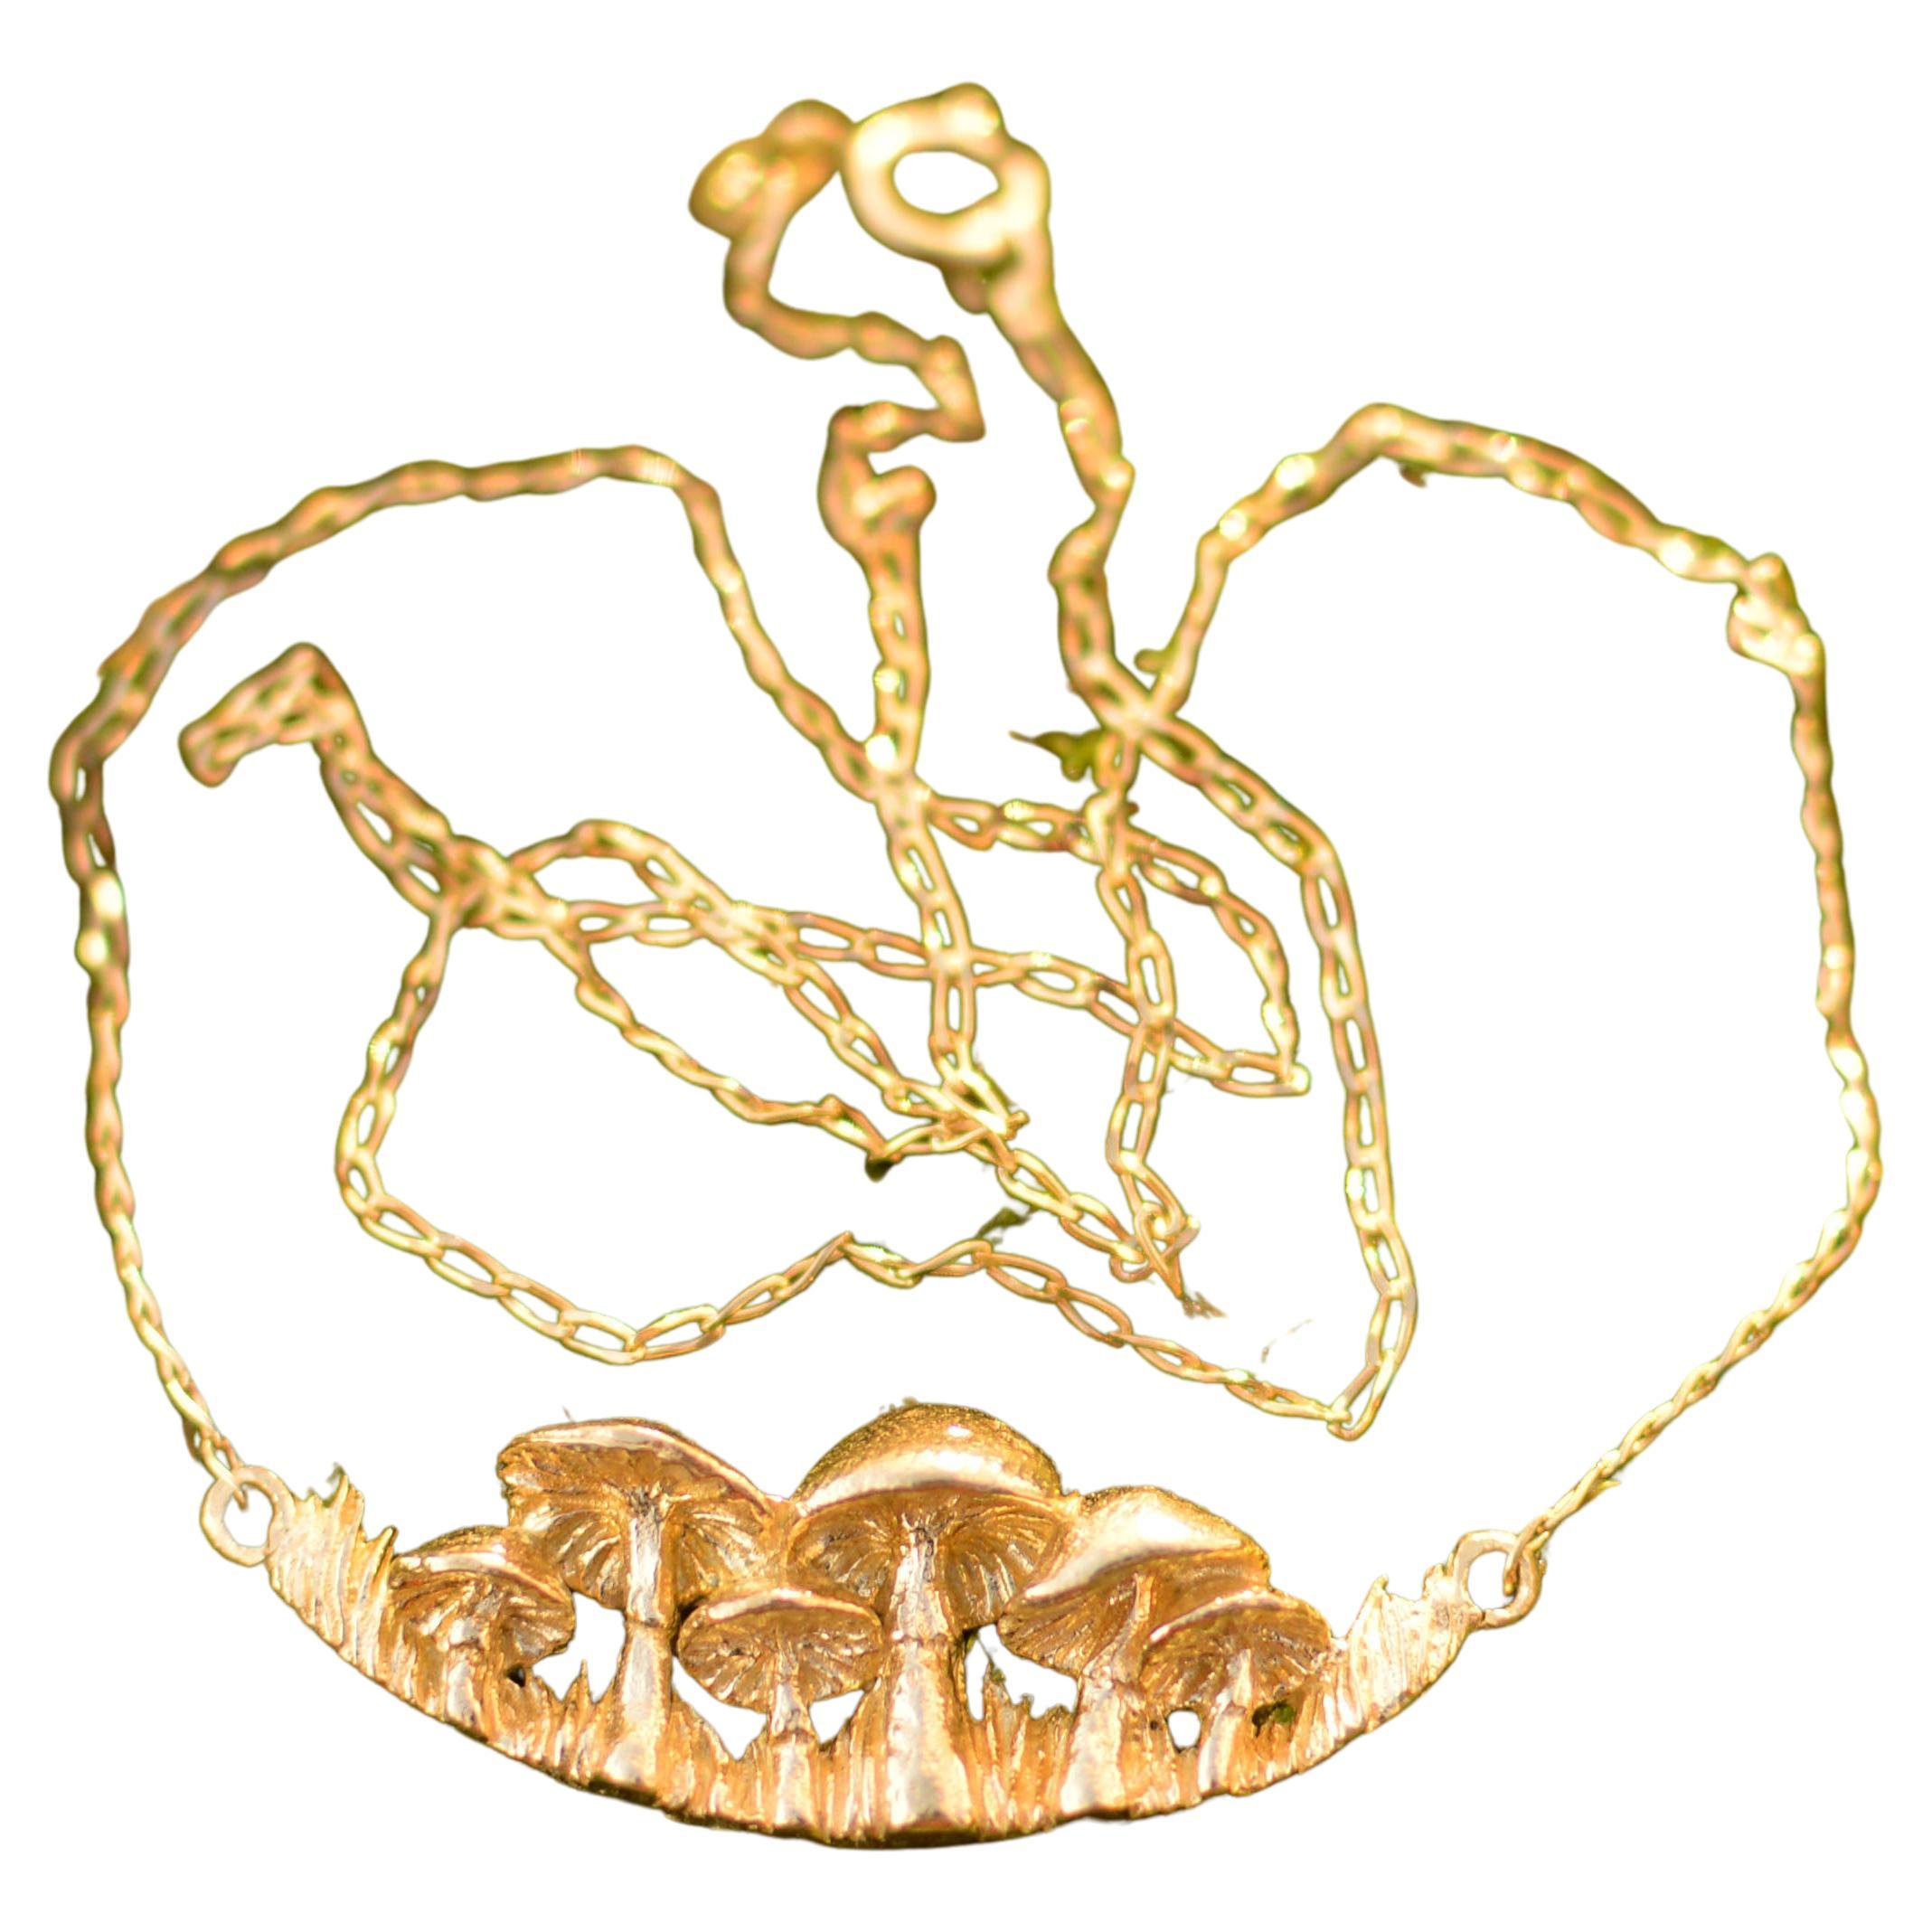 Solid 18 Carat Gold Mushroom Patch Necklace by Lucy Stopes-Roe